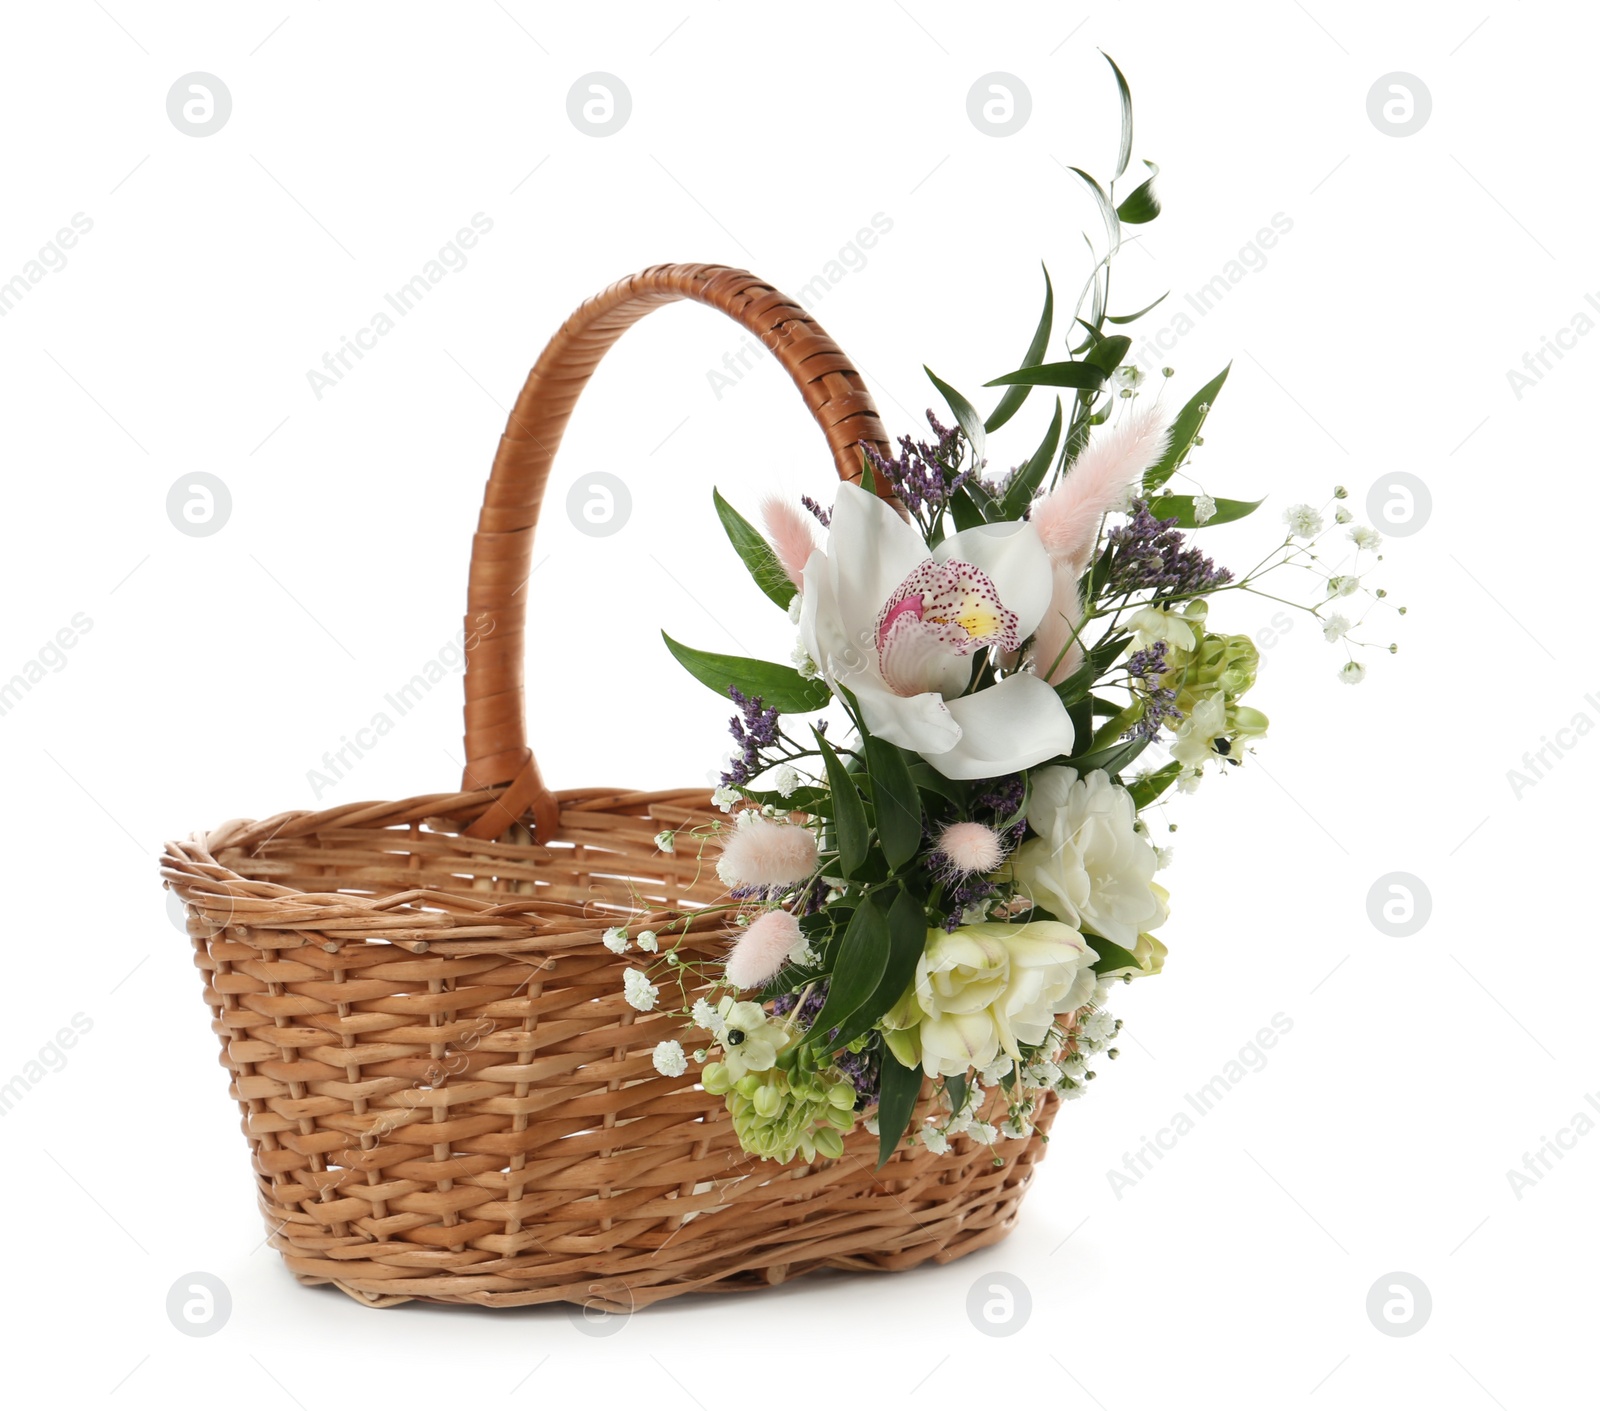 Photo of Wicker basket decorated with beautiful flowers on white background. Easter item